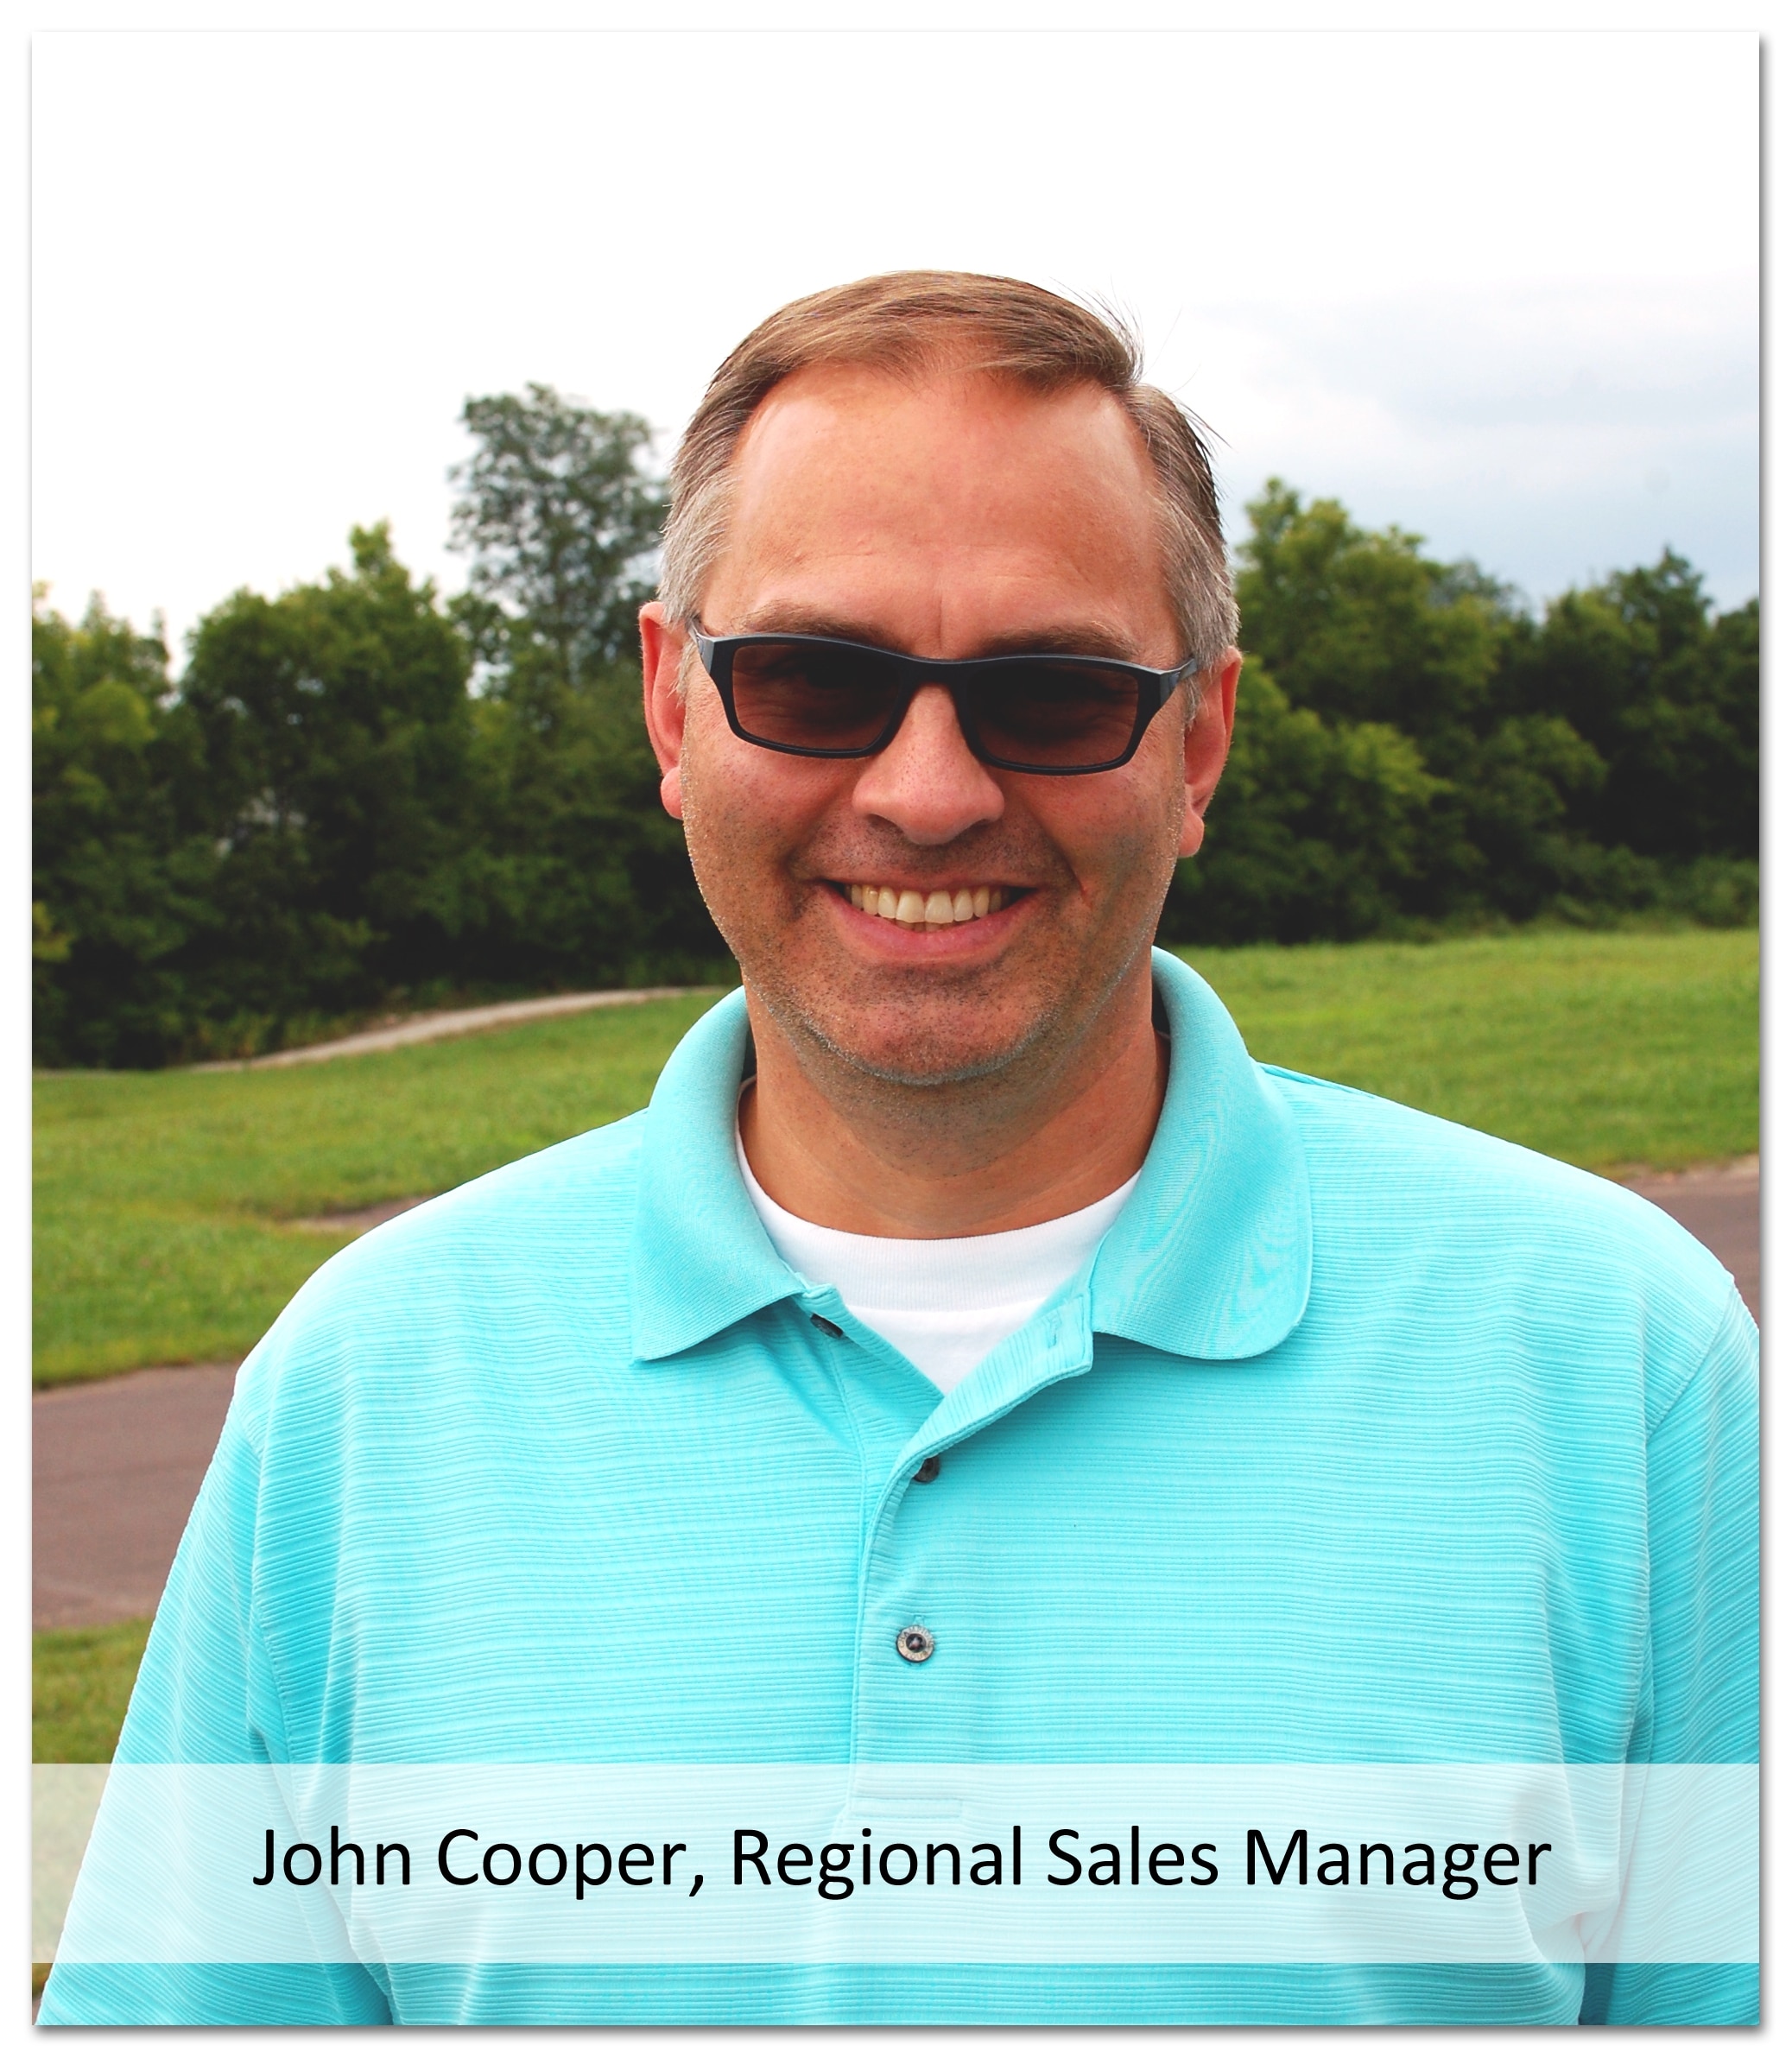 Welcome to the PRIER Family, John!